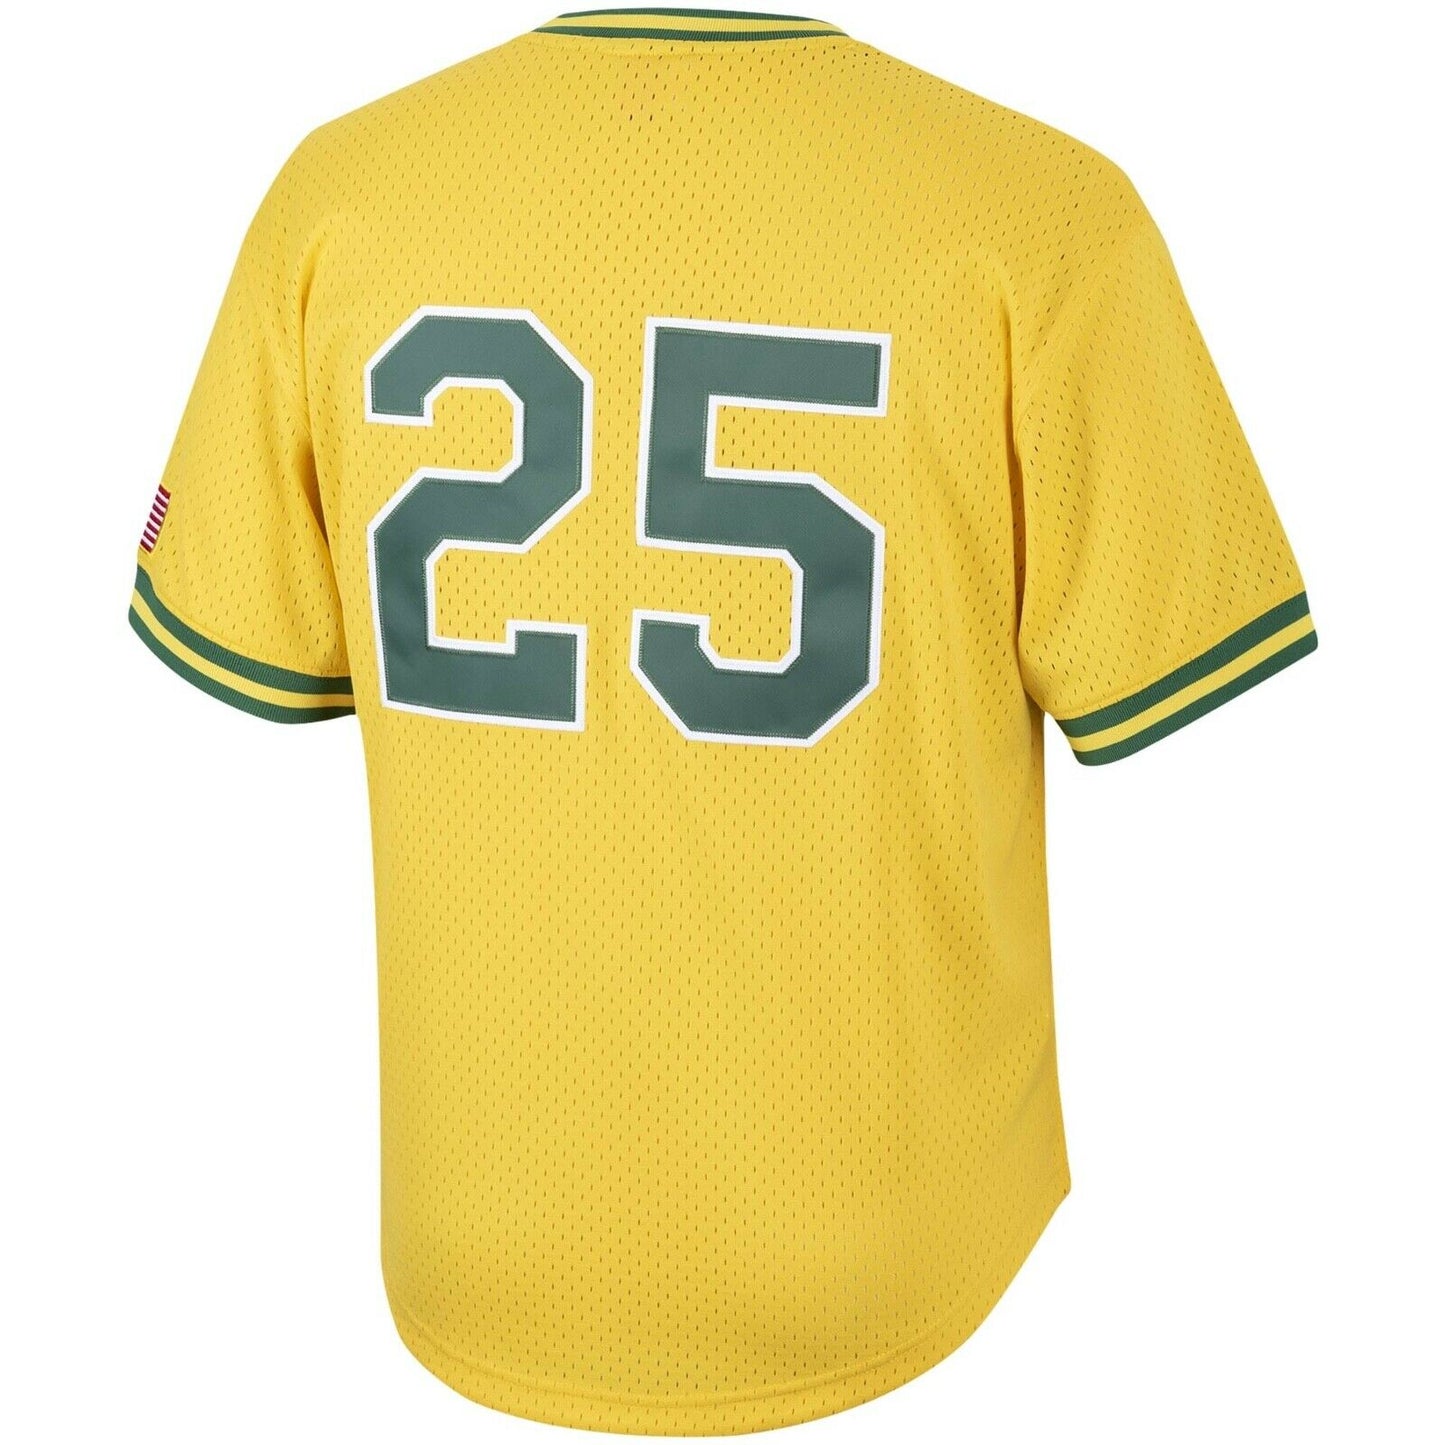 Mitchell & Ness Oakland Athletics Mark McGwire 1990 Cooperstown Collection Authentic Practice Jersey - Yellow